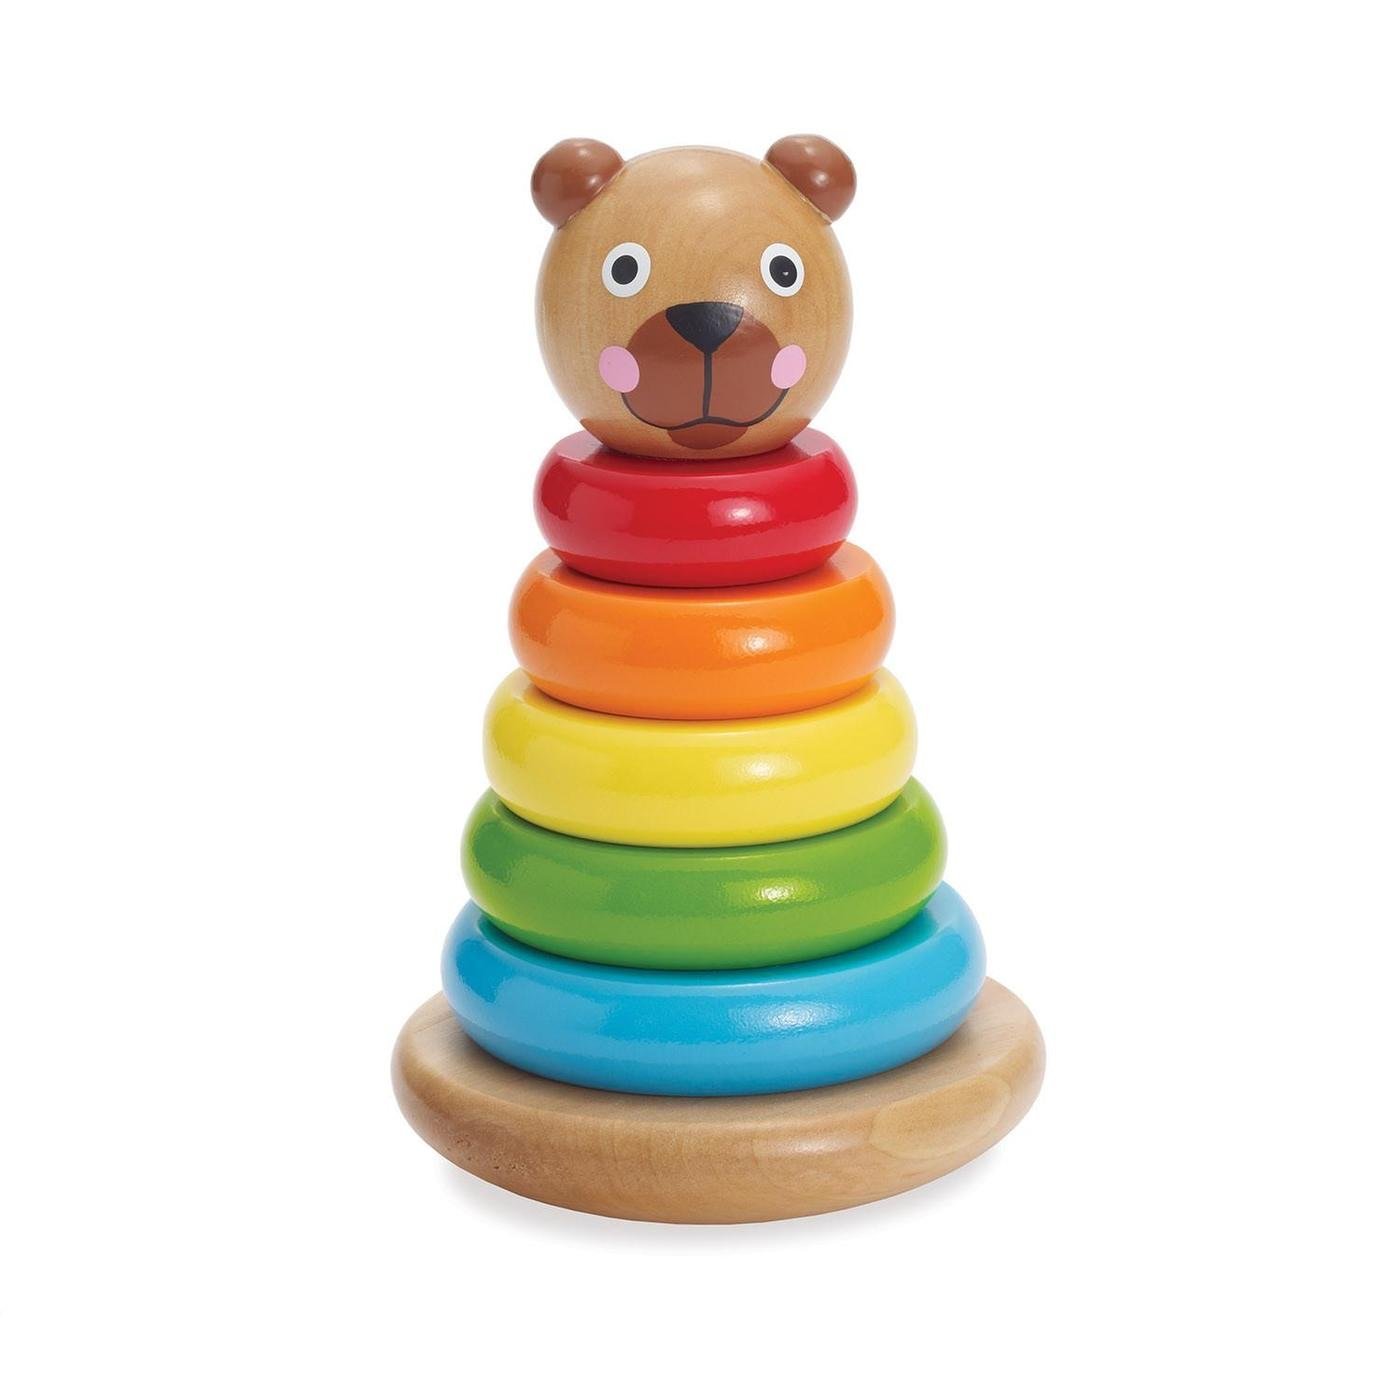 Brilliant Bear Magnetic Stack-up by Manhattan Toy - Wood Wood Toys Canada's Favourite Montessori Toy Store